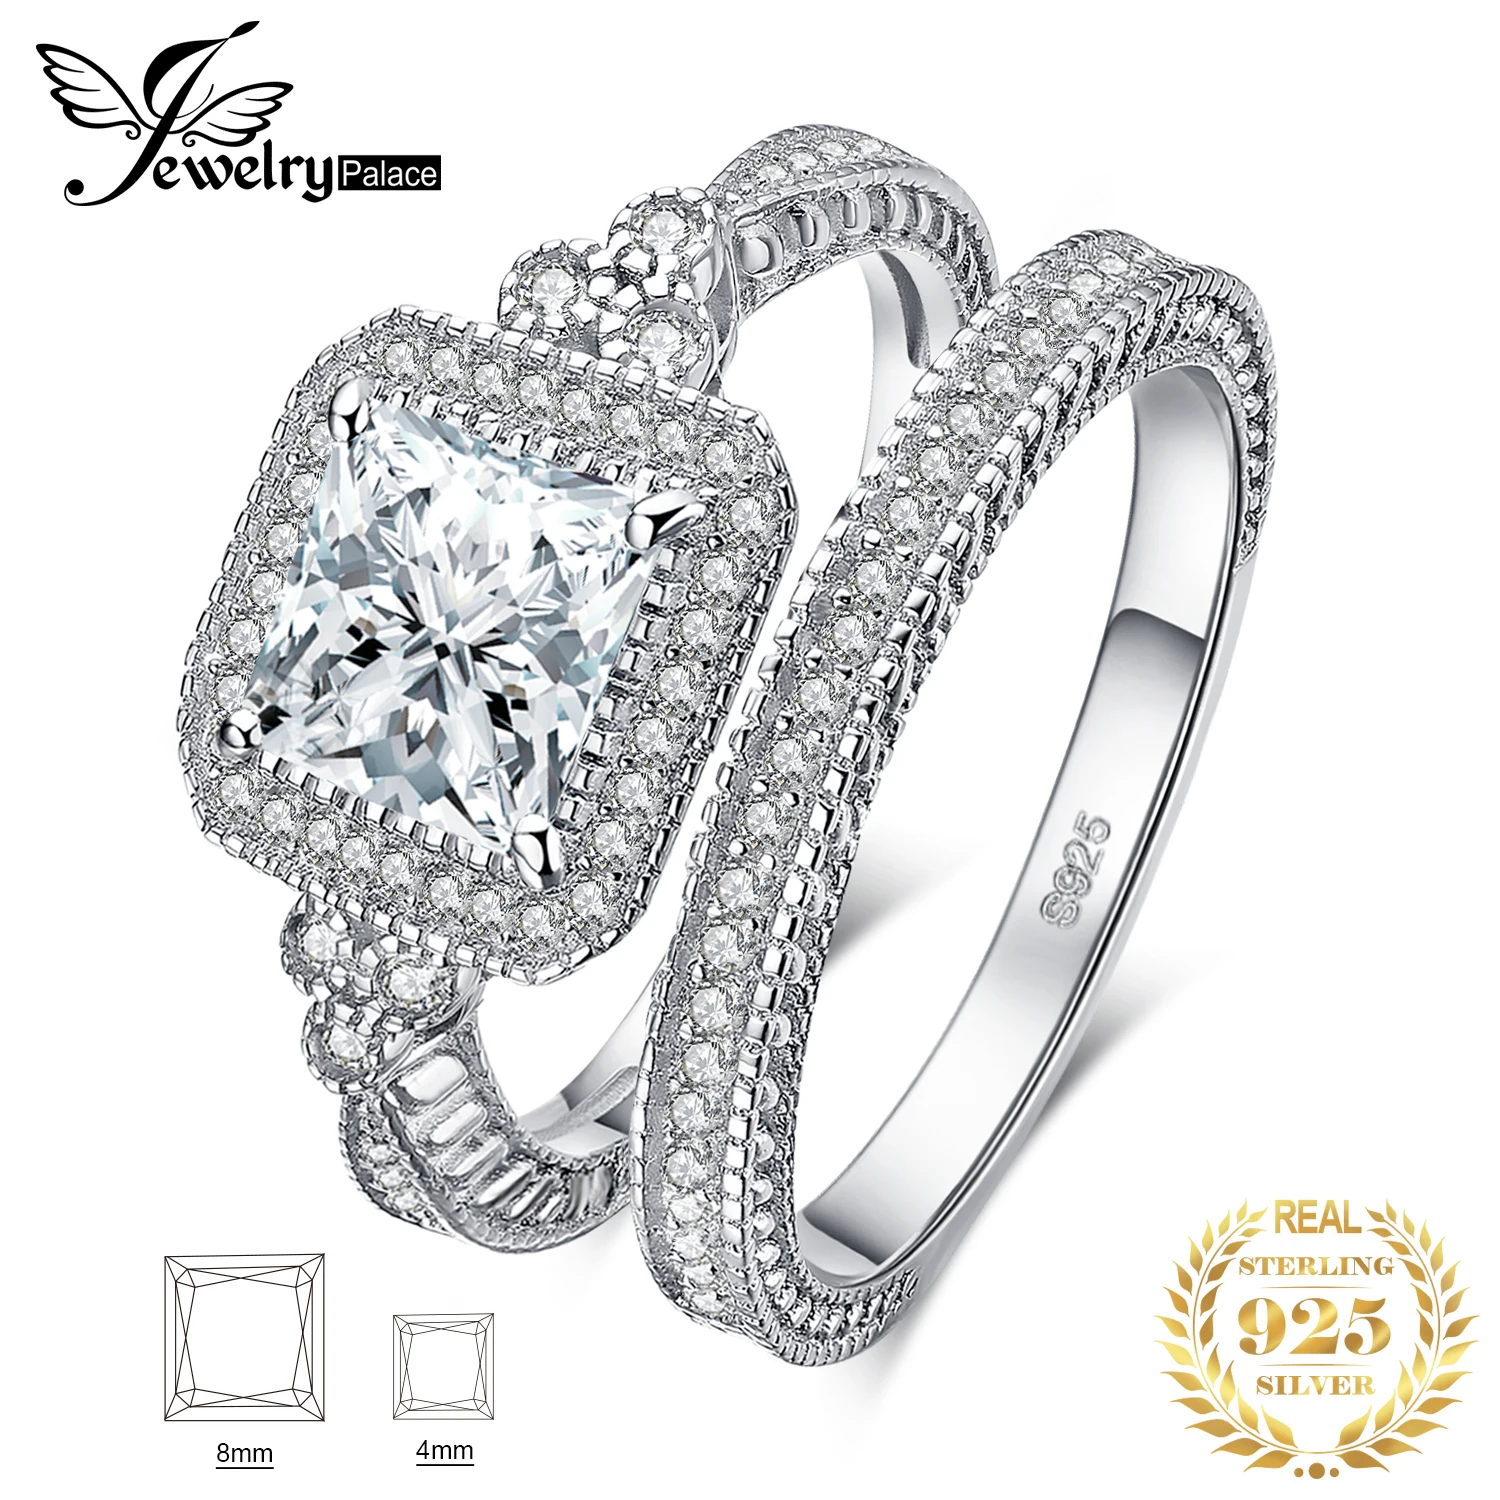 JewelryPalace 2 Pcs Wedding Ring for Women 925 Sterling Silver Engagement Ring AAAAA CZ Simulated Diamond Luxury Bridal Sets